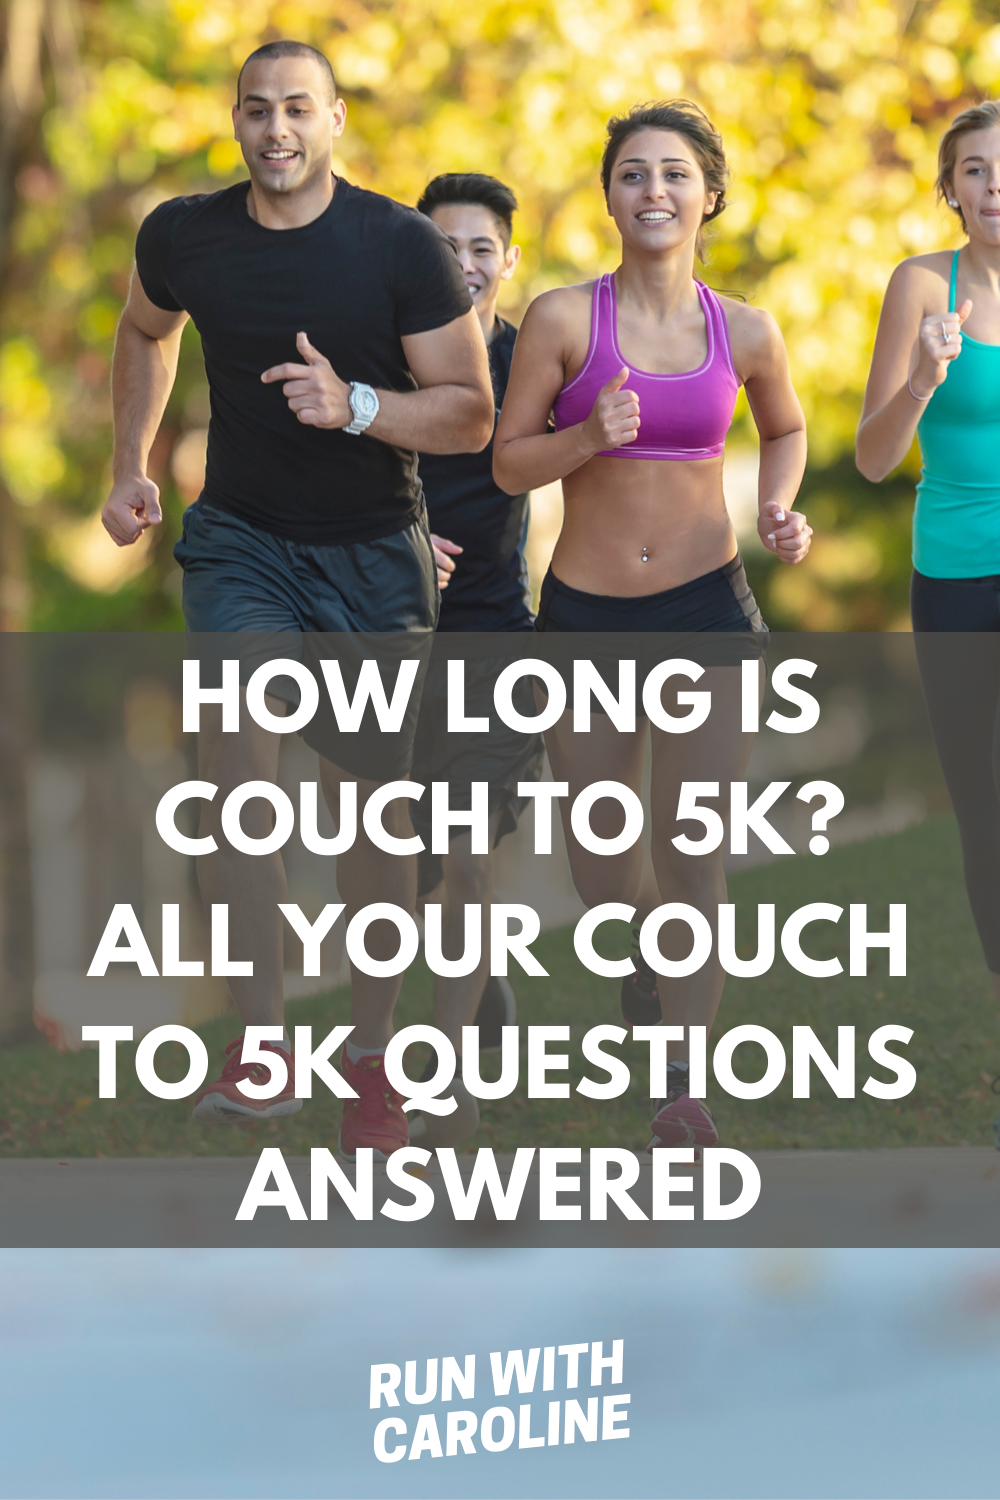 What is the best Couch to 5k plan? All your C25K questions answered